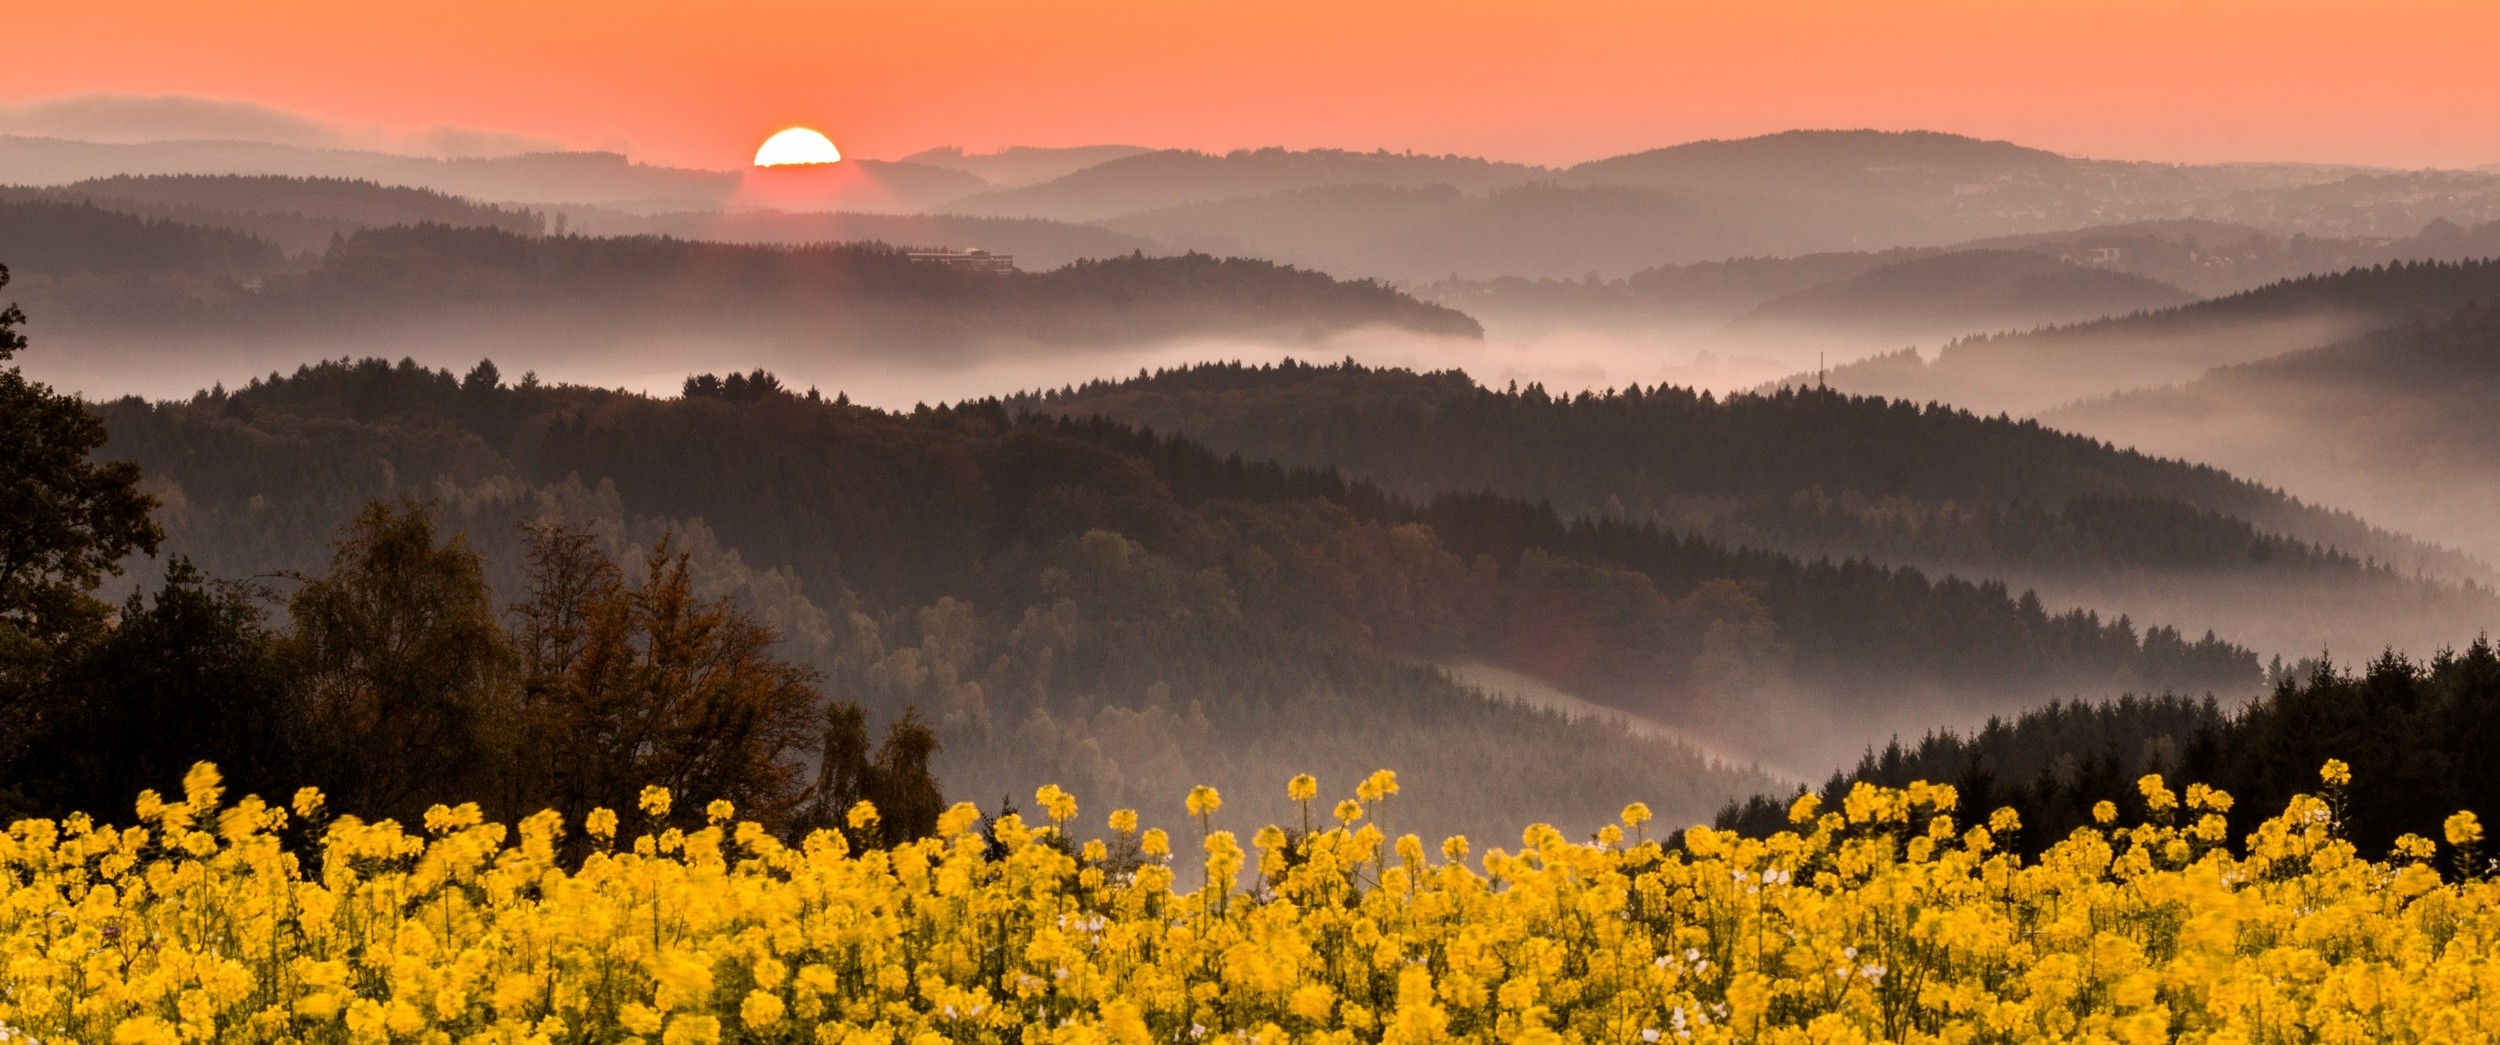 nature, Landscape, Mist, Wildflowers, Mountains, Forest, Pink, Sky, Yellow, Flowers, Germany Wallpaper